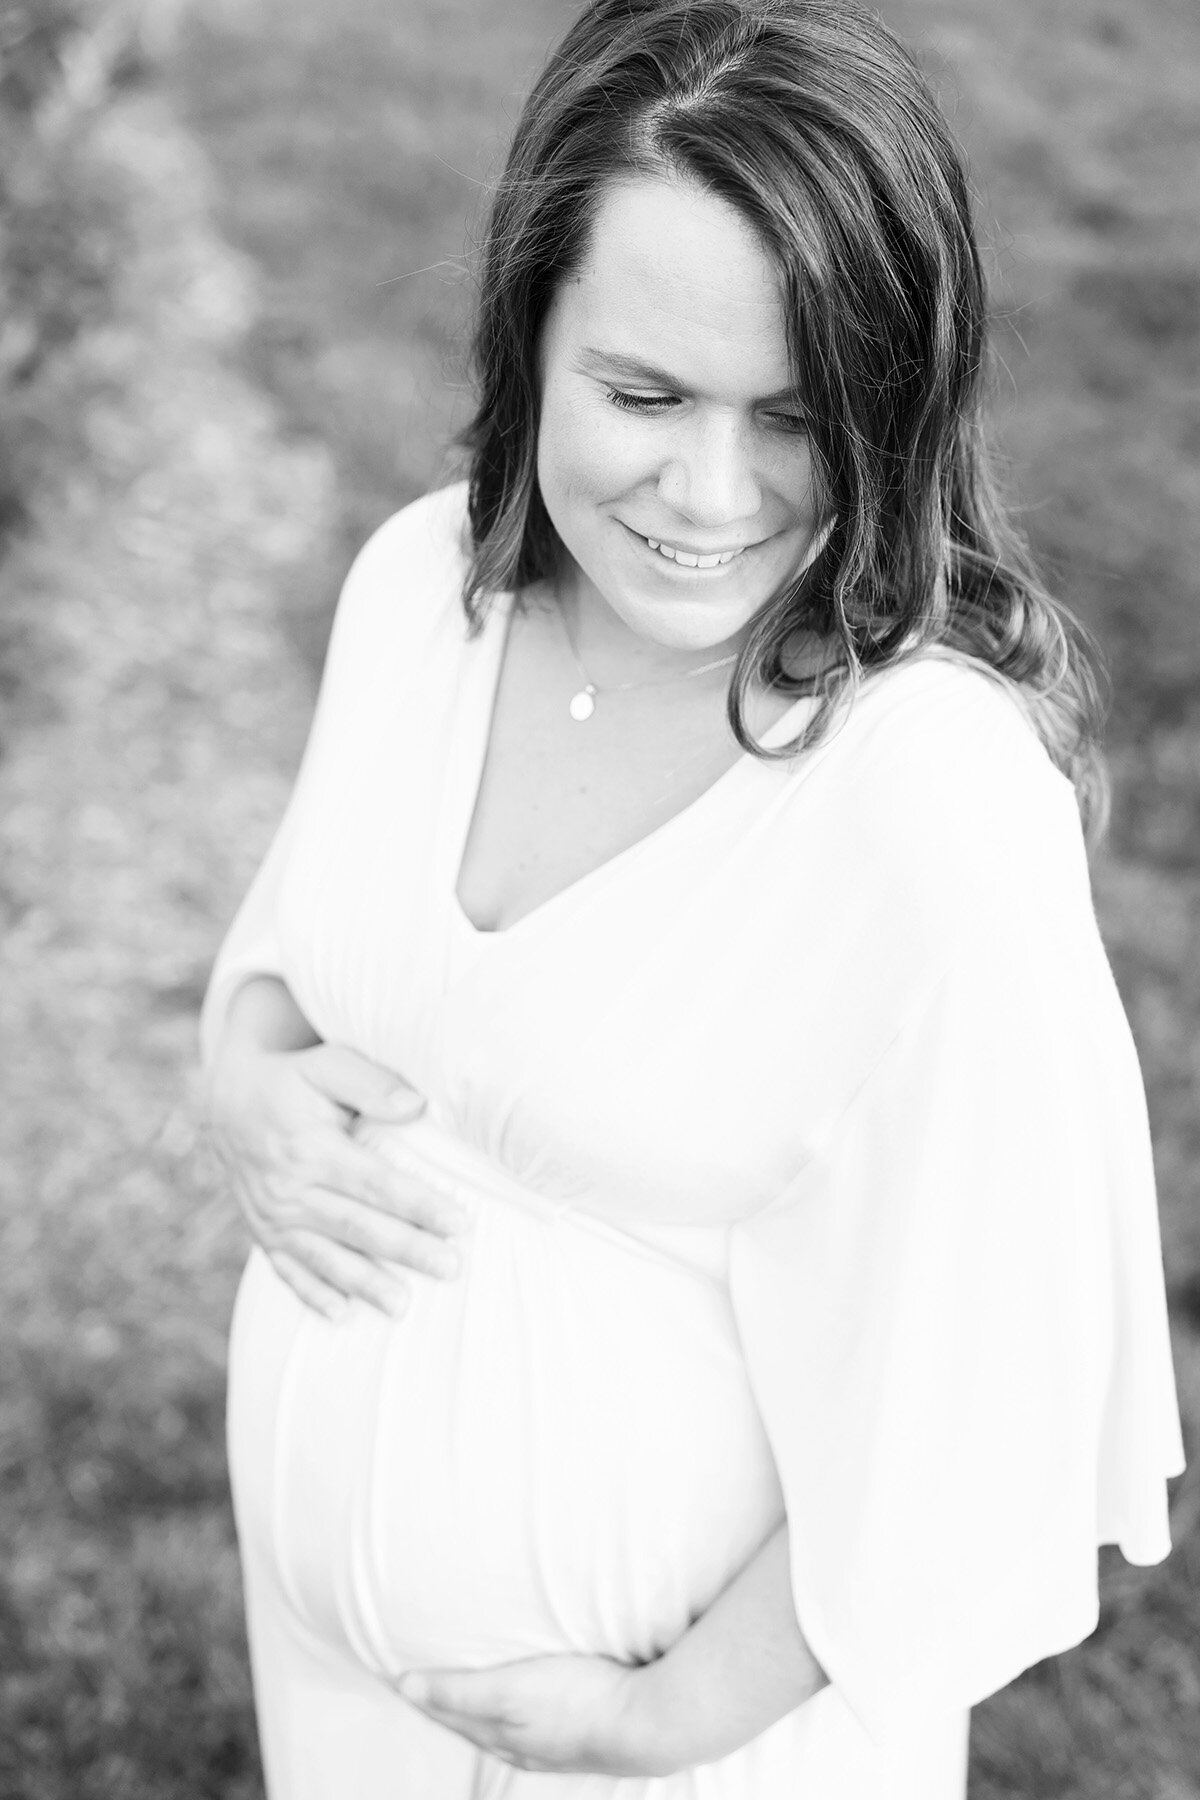 outdoor photo session | louisville ky | julie brock photography | baby first year photos southern indiana